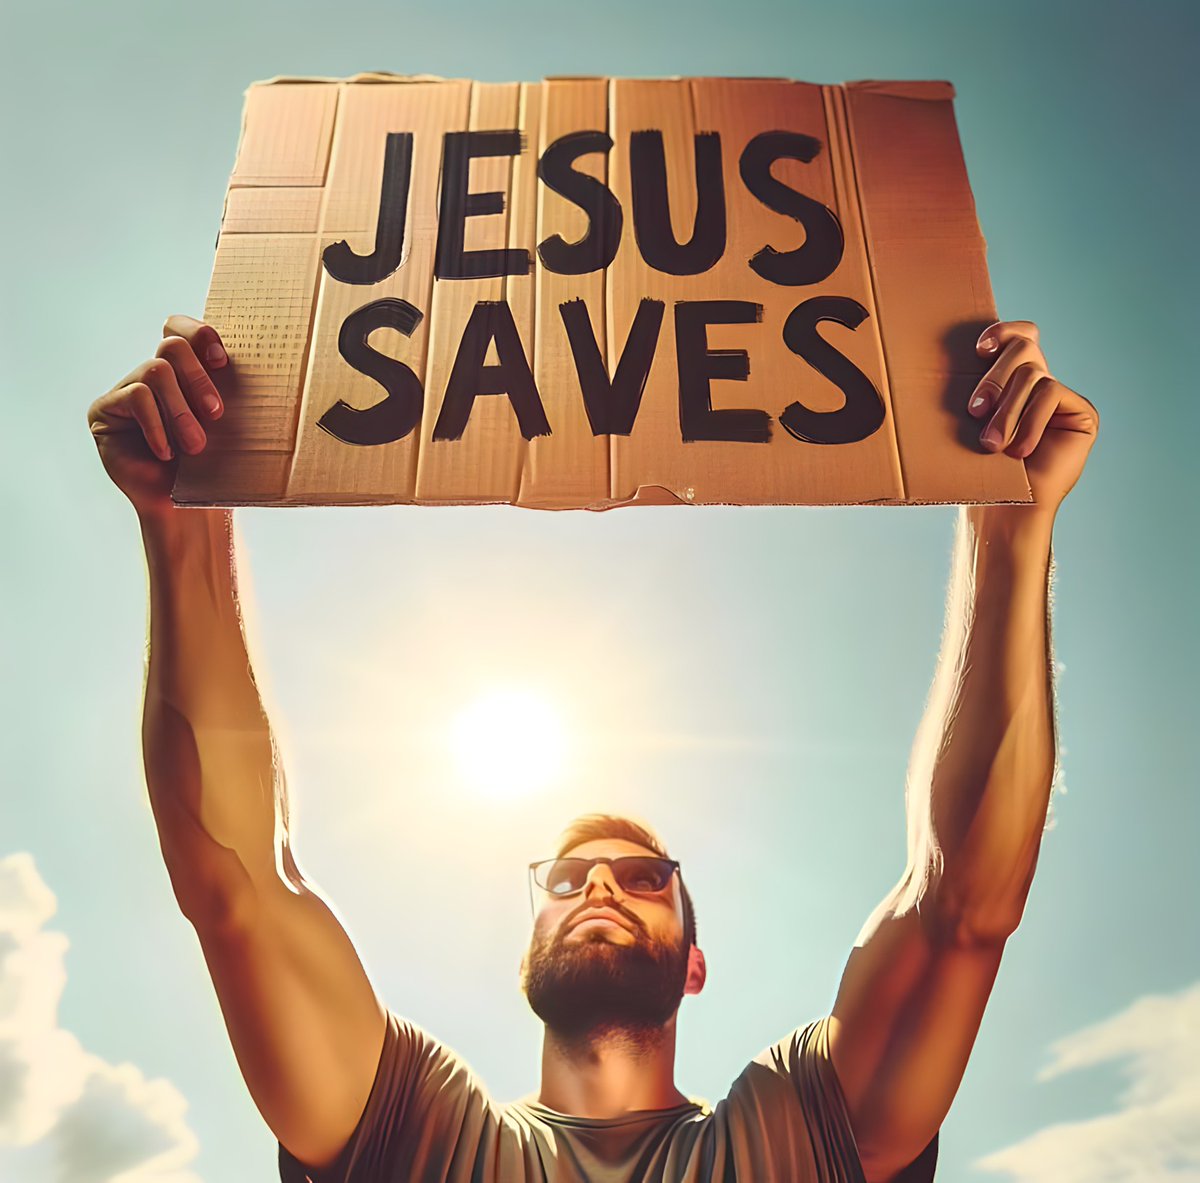 Have you been saved by Jesus Christ? A. Yes B. No